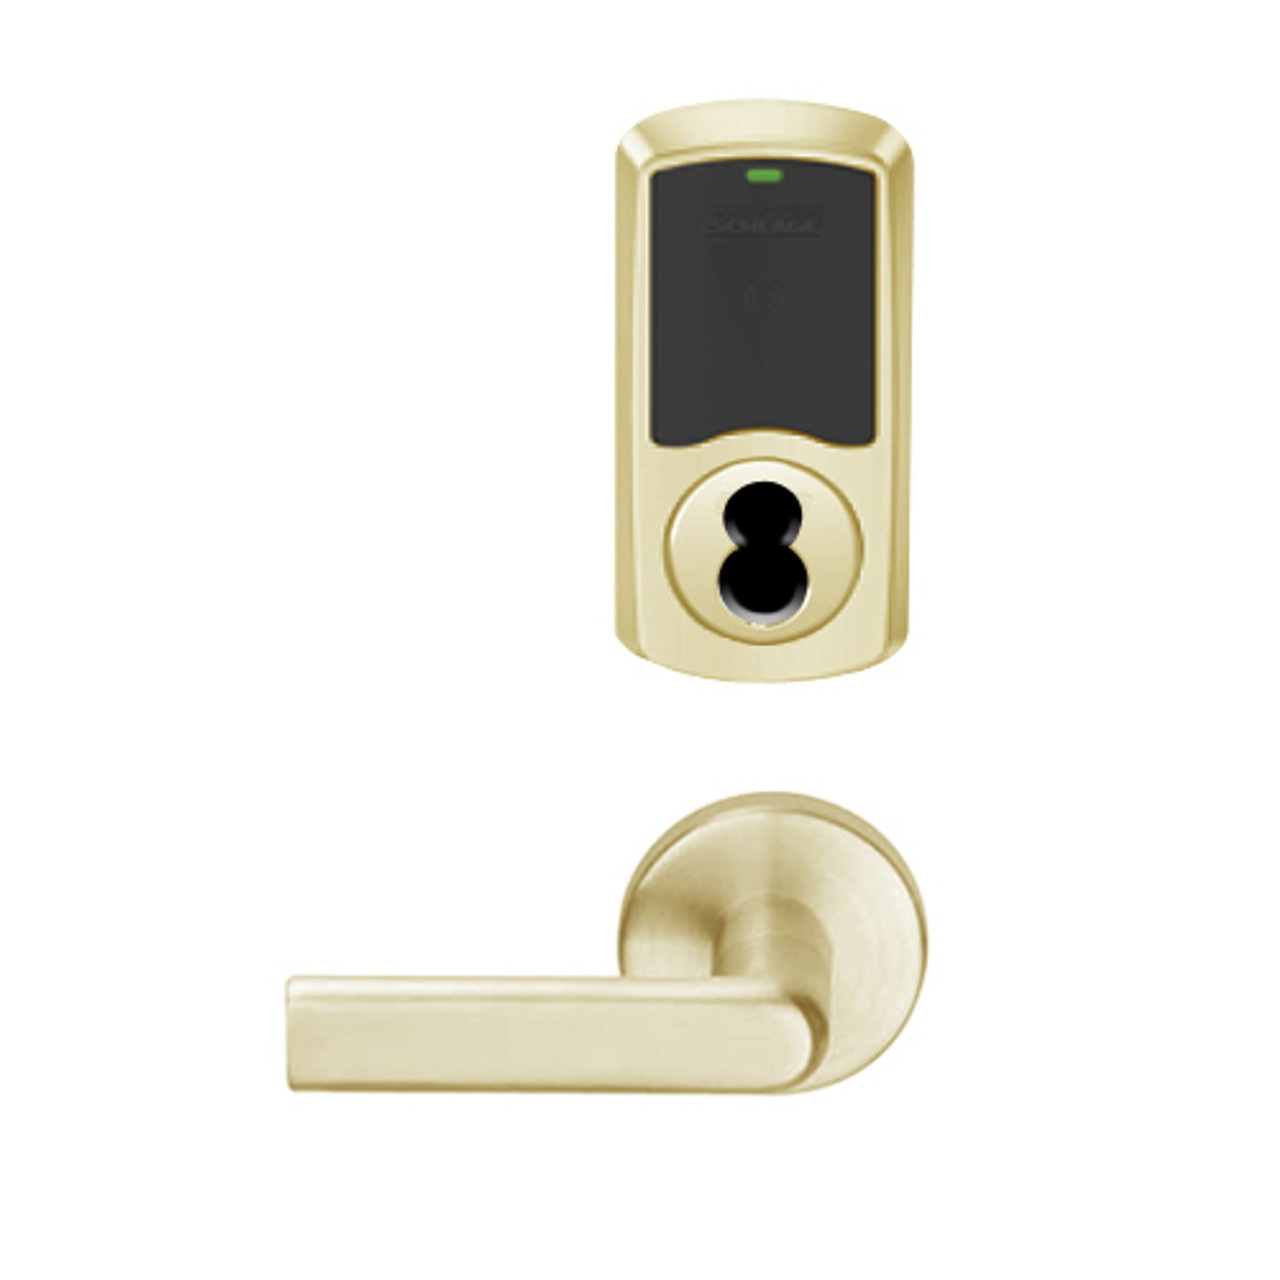 LEMB-GRW-J-01-606-00A Schlage Privacy/Office Wireless Greenwich Mortise Lock with Push Button & LED Indicator and 01 Lever Prepped for FSIC in Satin Brass